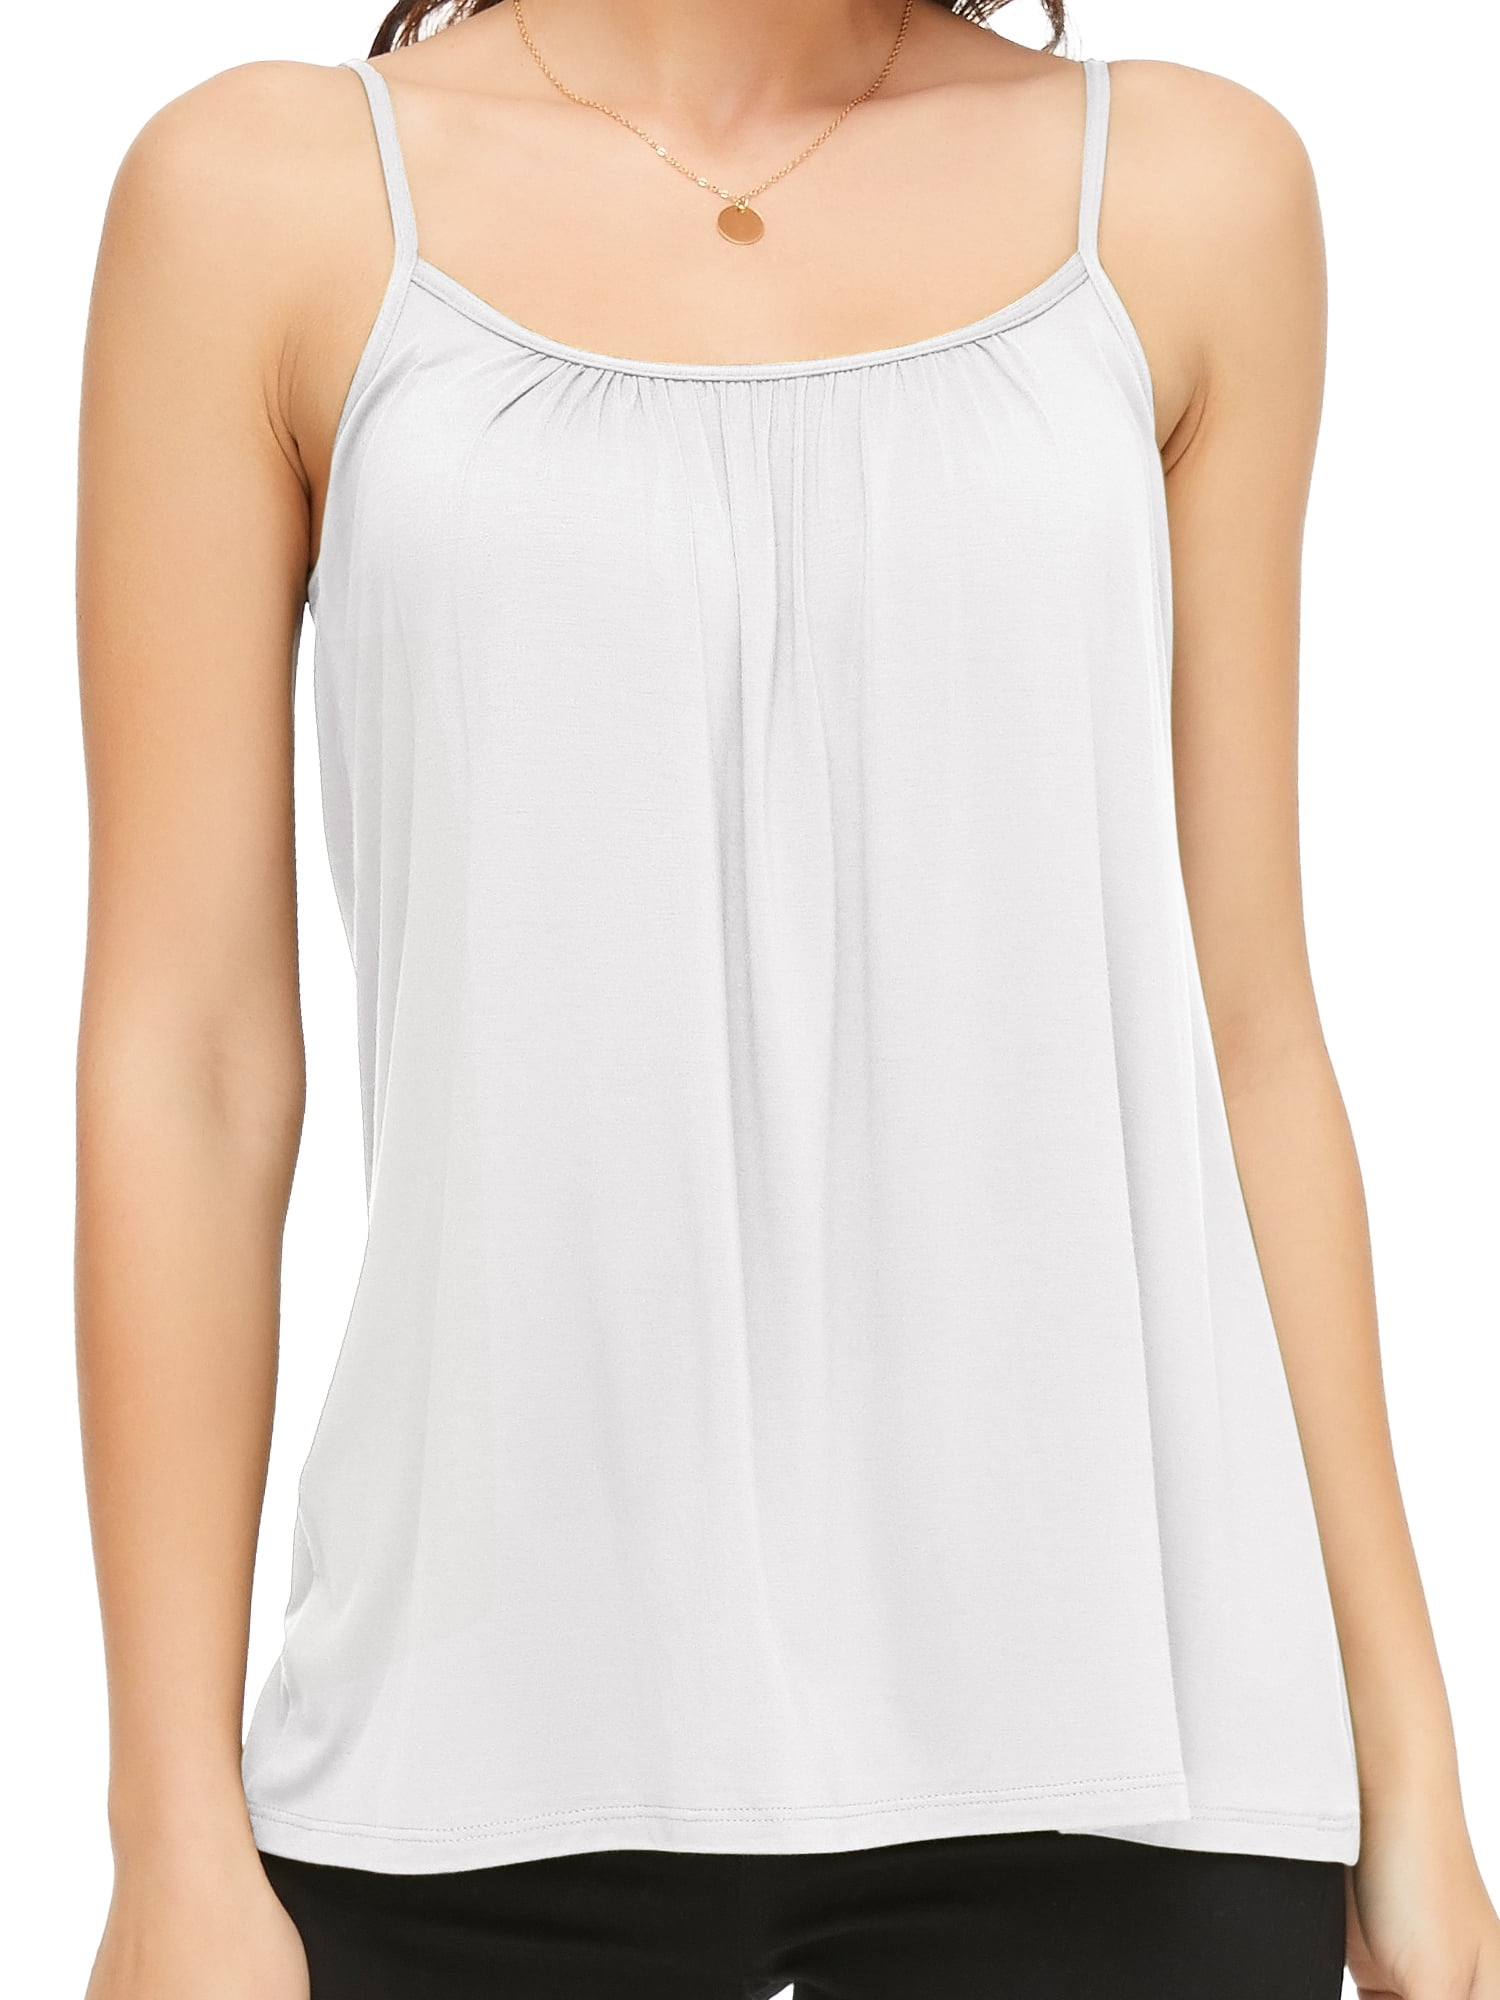 QRIC Women's Basic Solid Cami with Built-in Shelf Bra Flowy Swing Pleated  Camisole With Adjustable Straps (S-4XL)